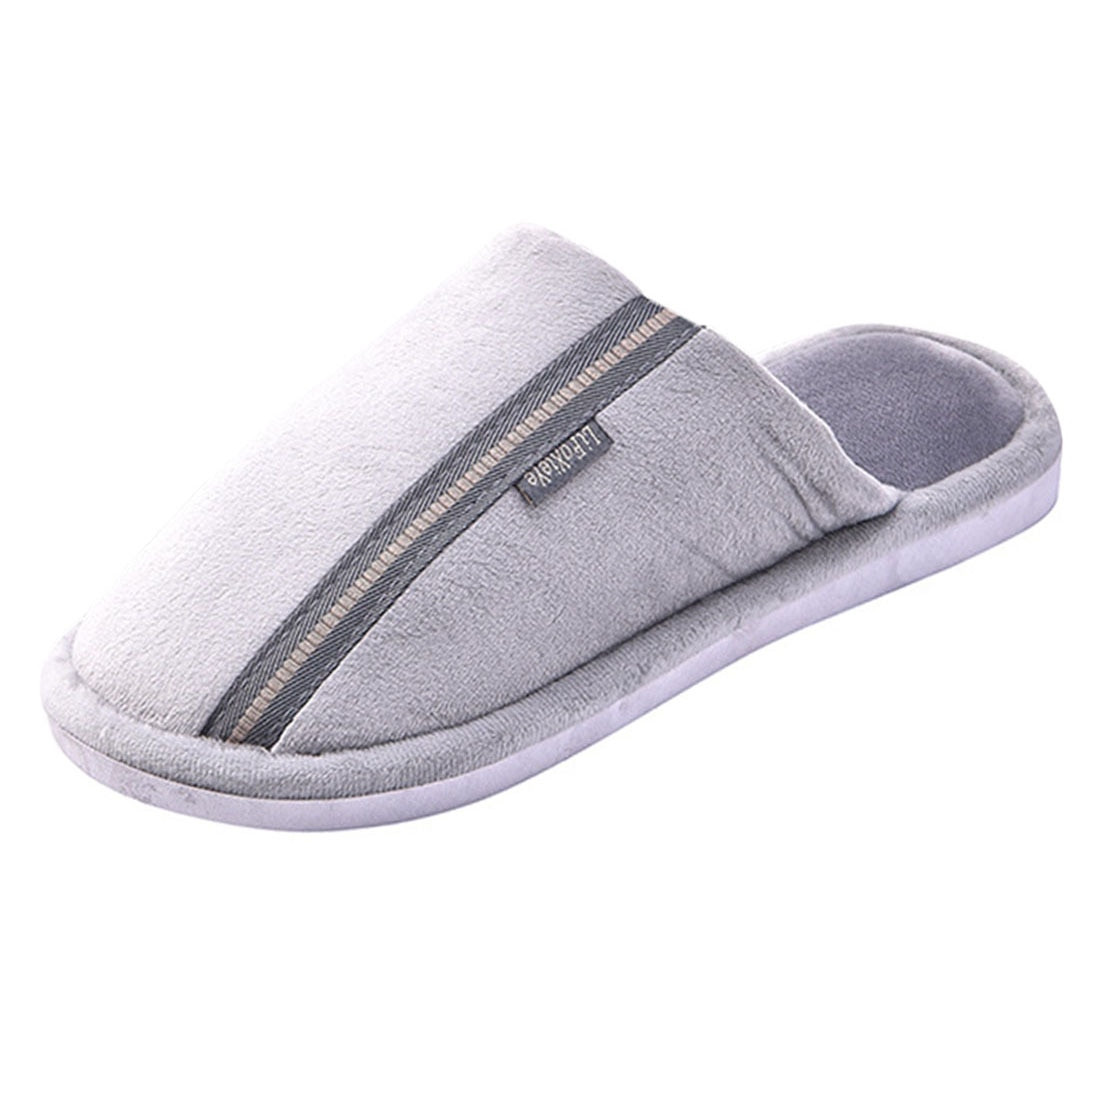 Mens Bedroom Slippers
 2018 New Indoor Slippers Male Soft Shoes Boy Cotton